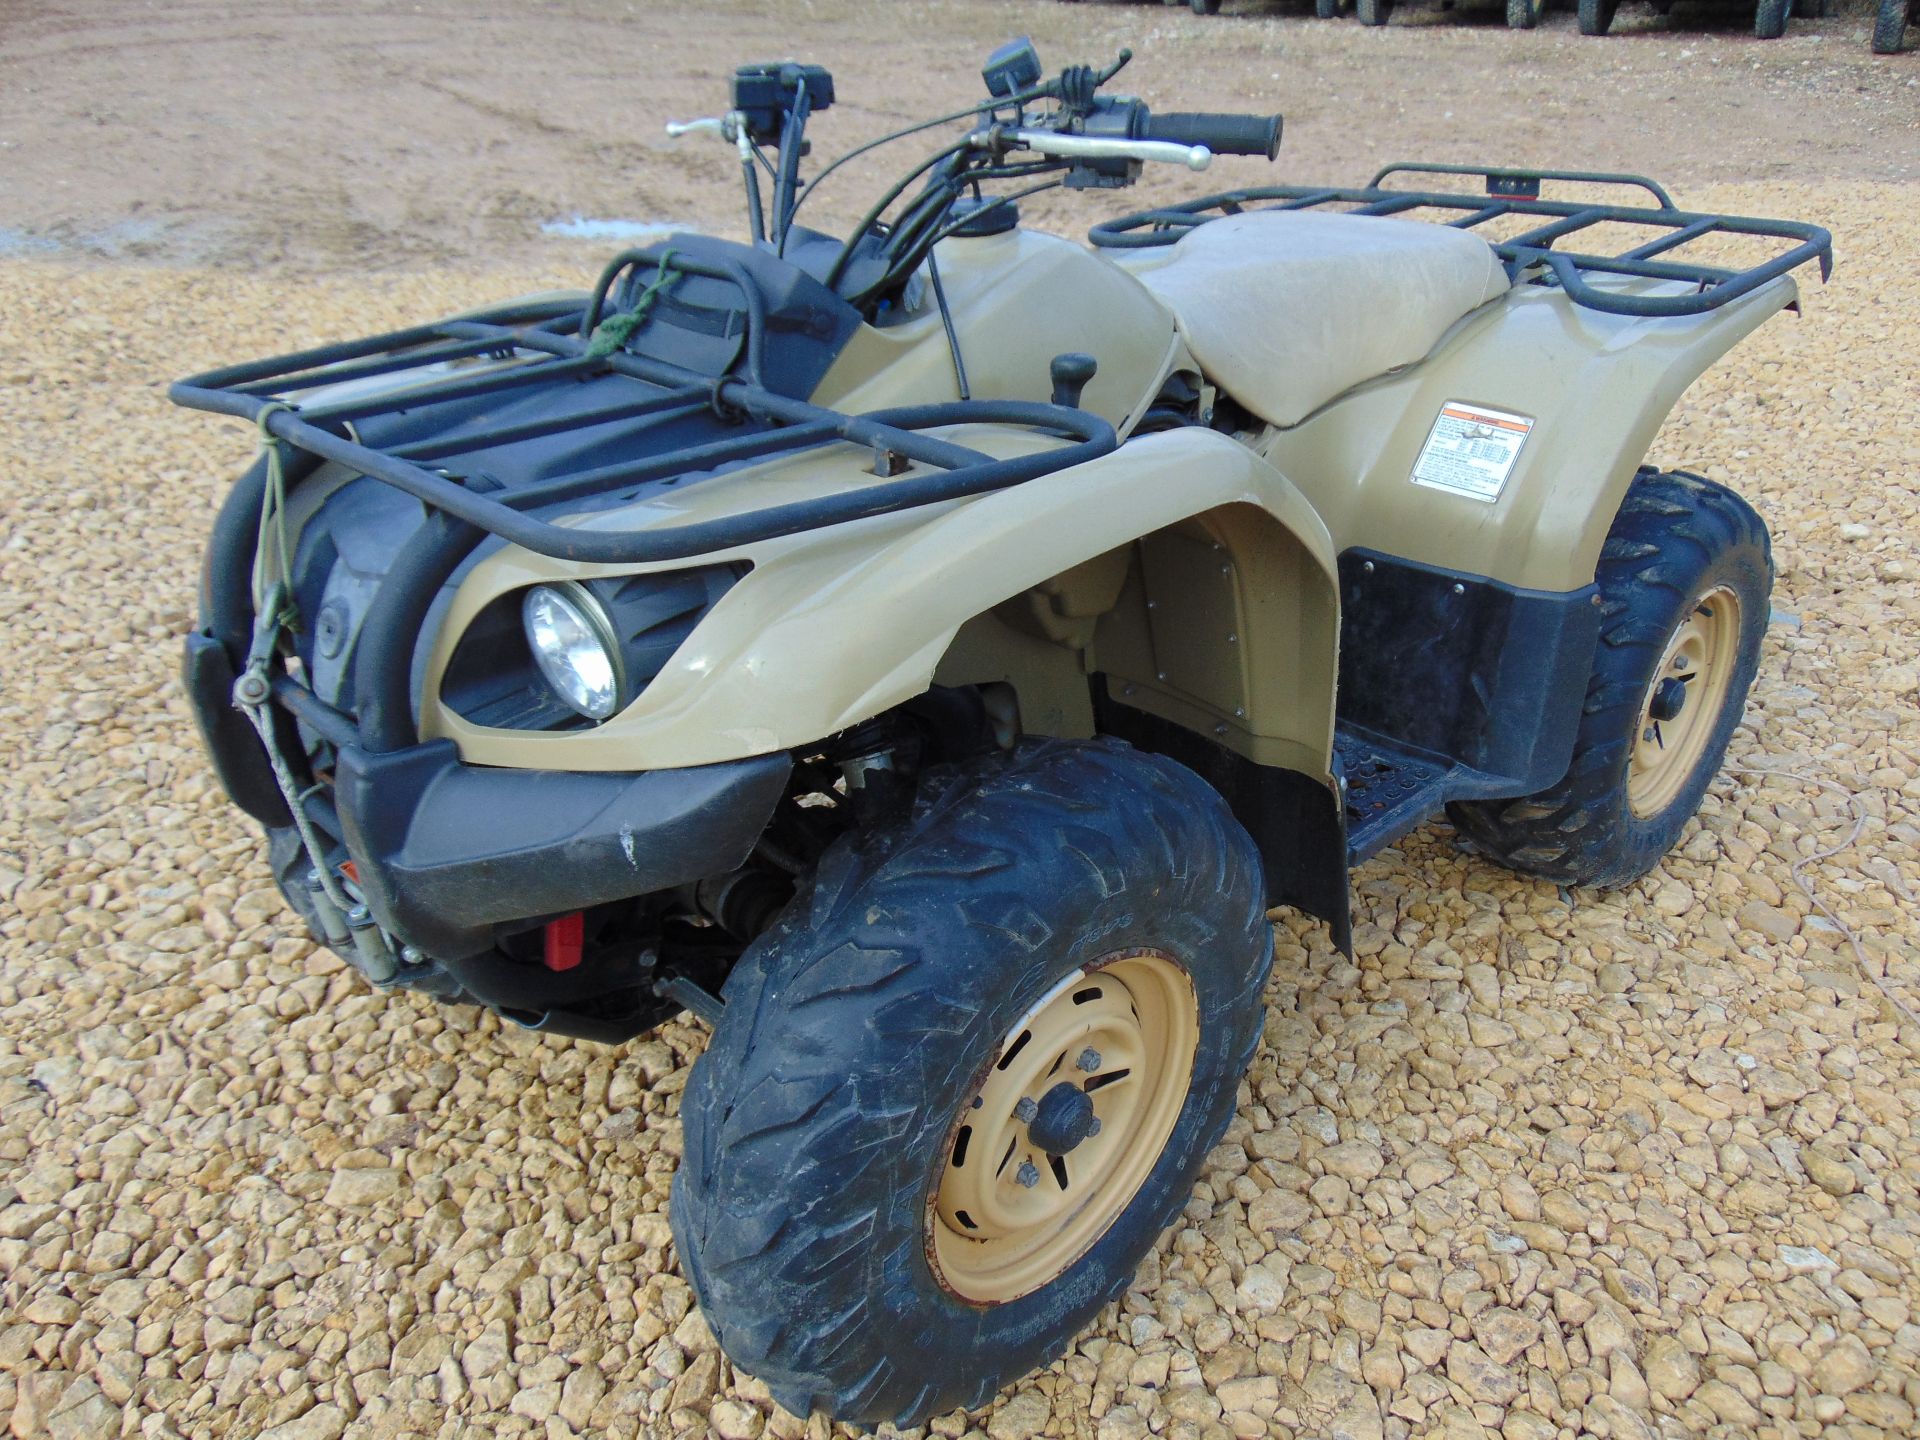 Military Specification Yamaha Grizzly 450 4 x 4 ATV Quad Bike Complete with Winch - Image 3 of 14